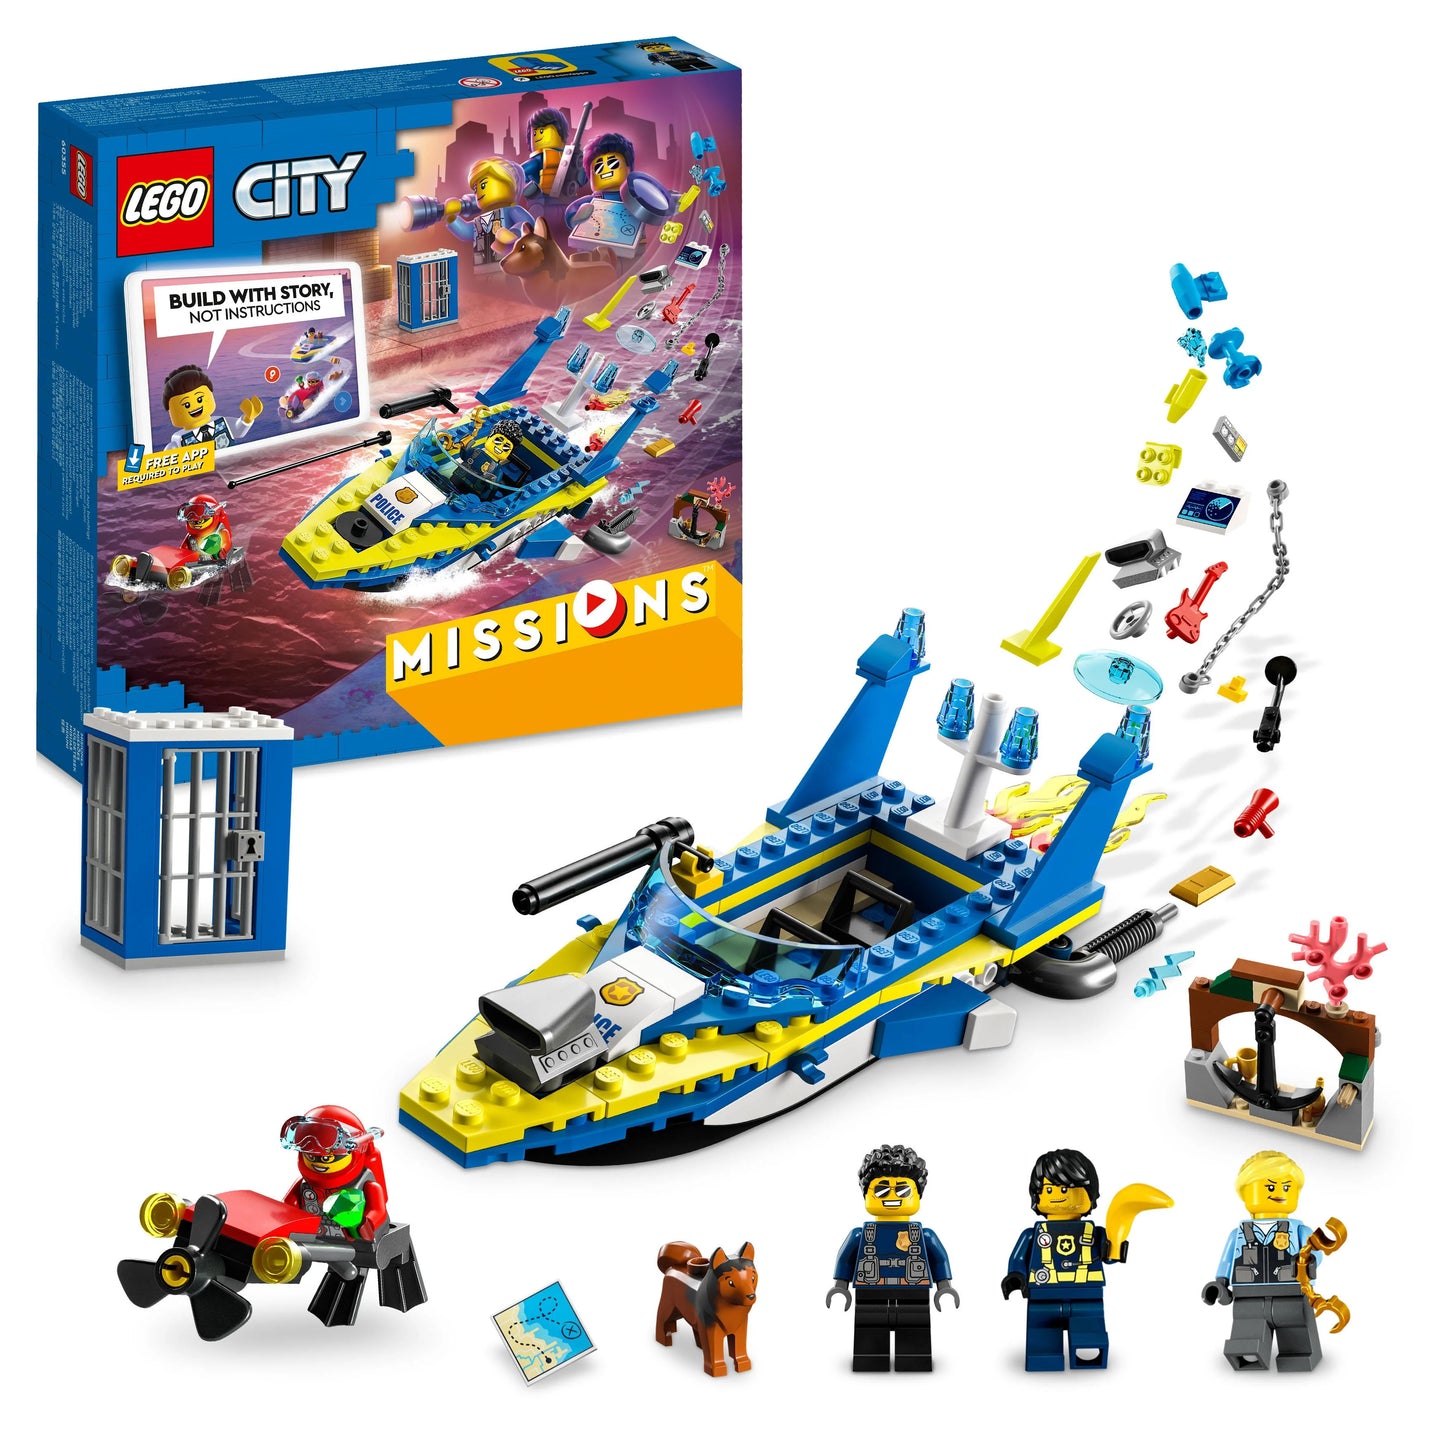 Water Police Detective Missions-LEGO City